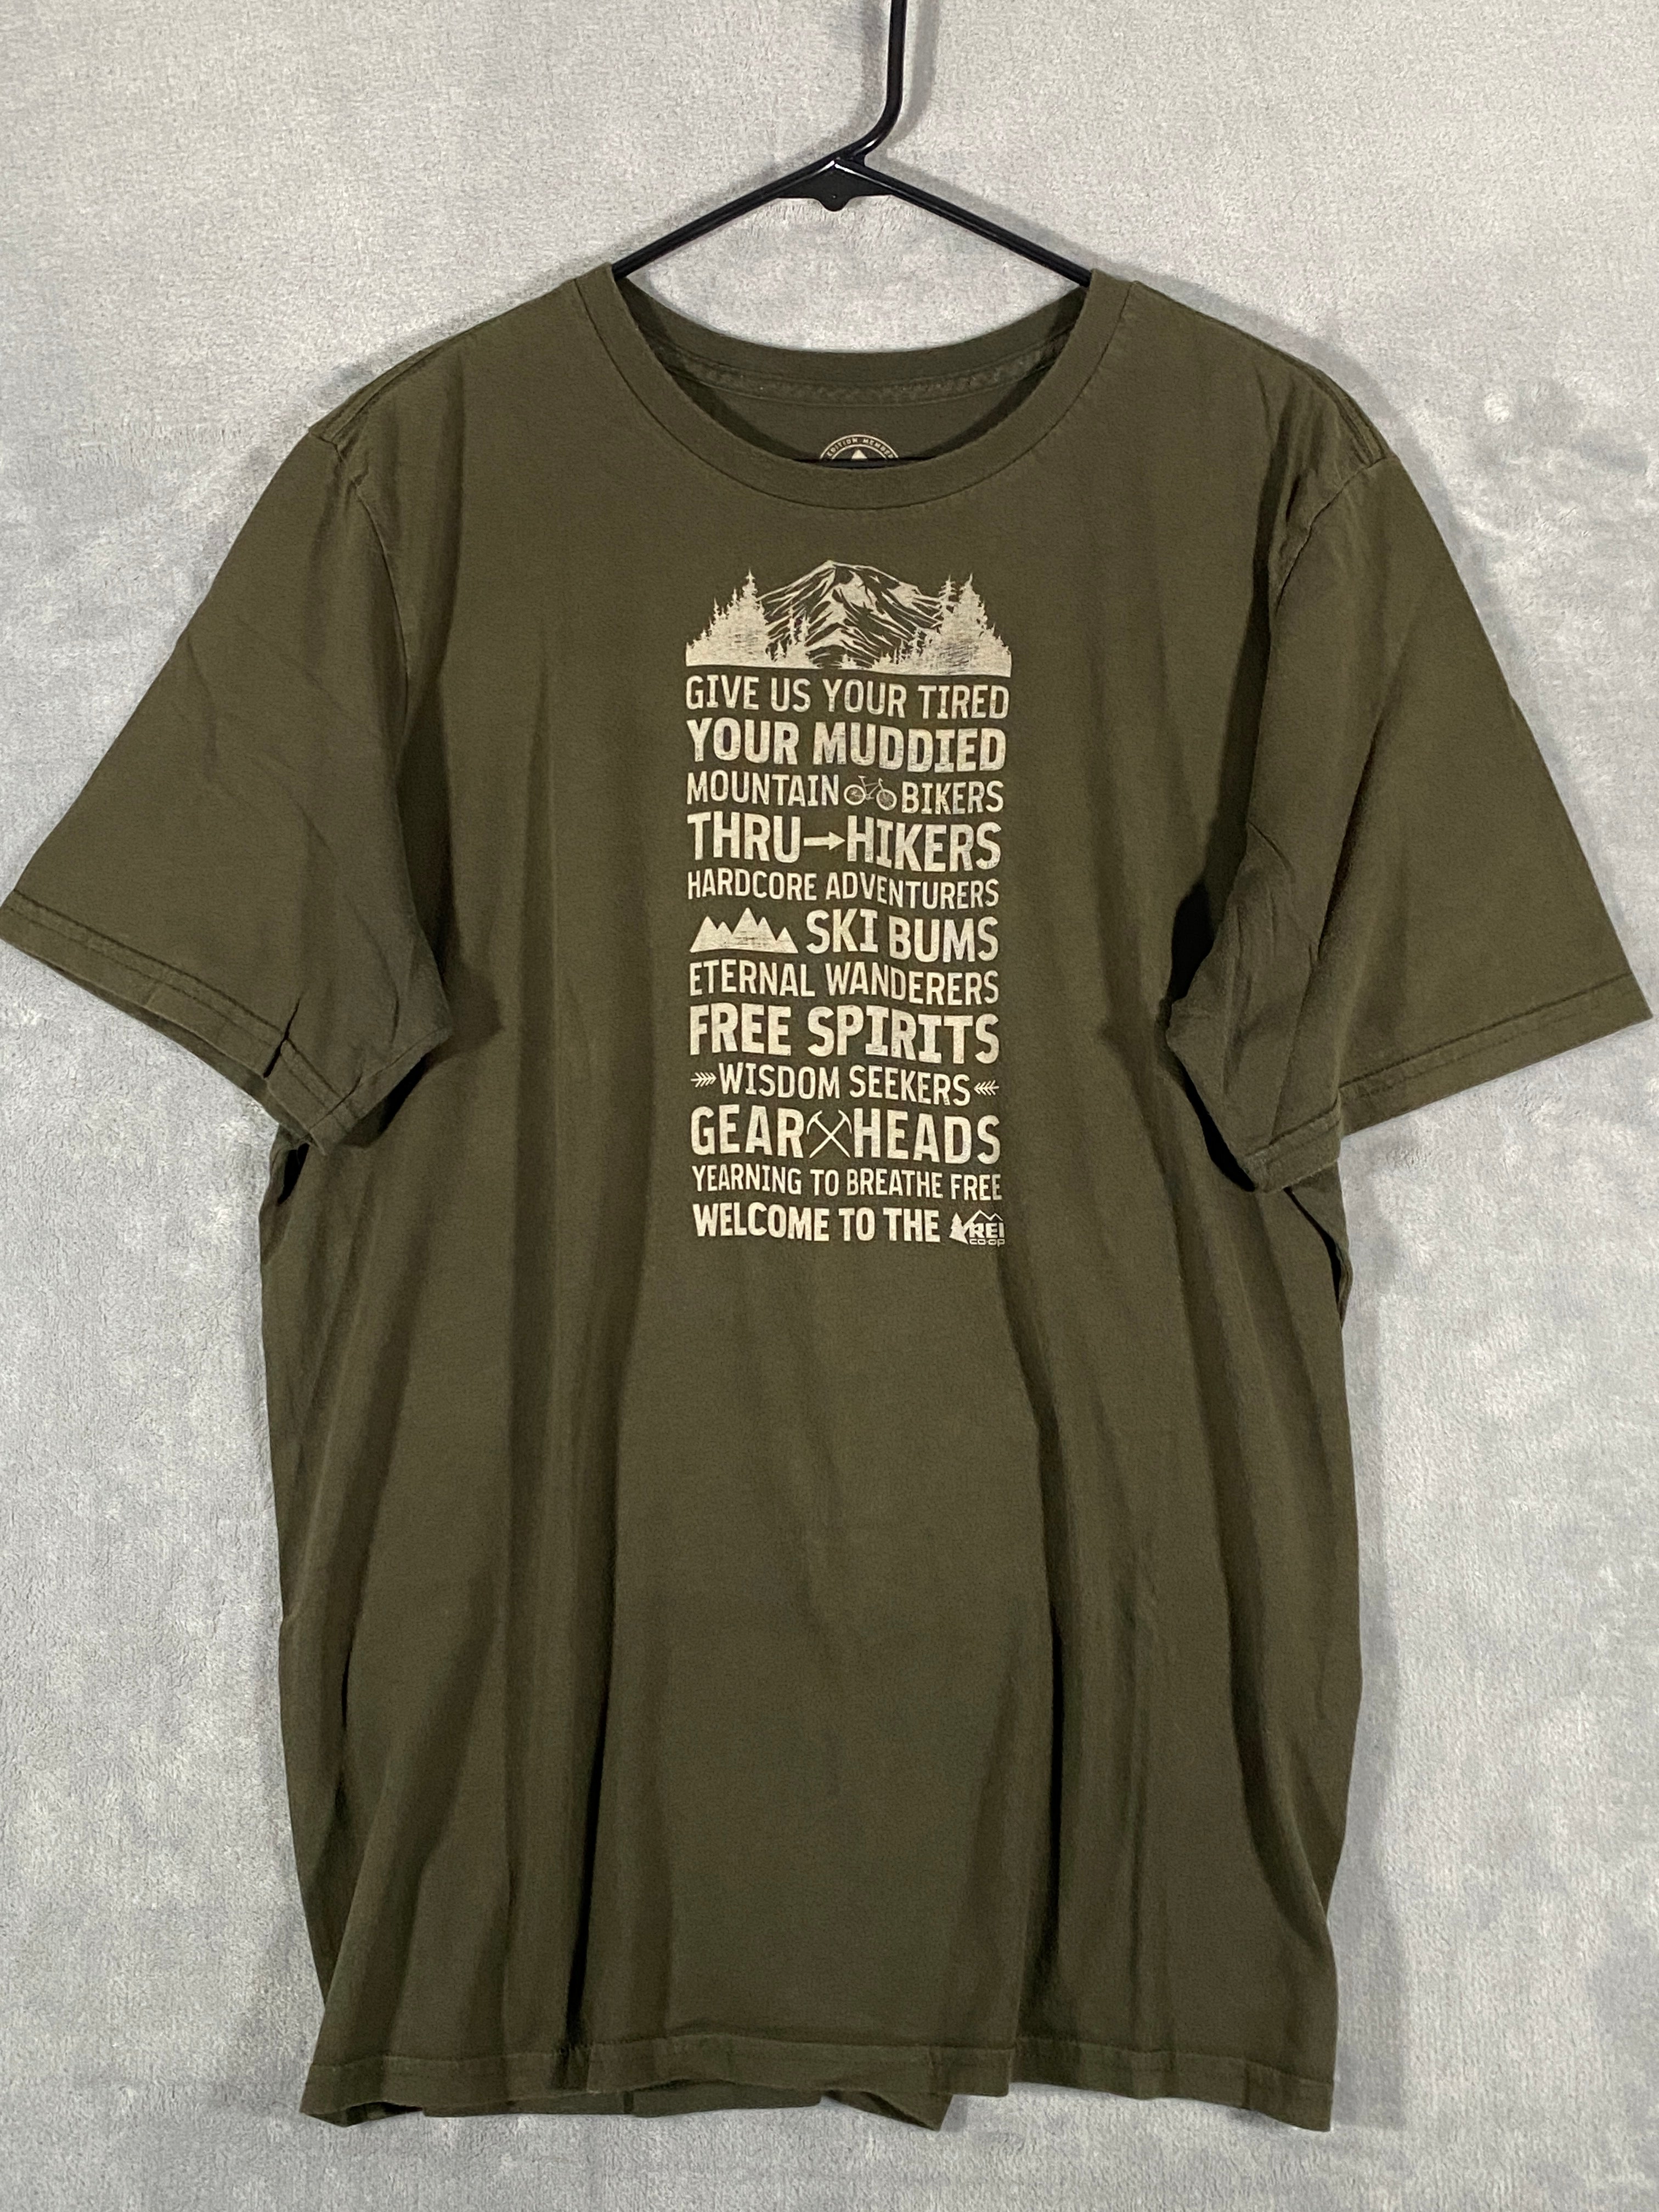 O'Neill T Shirt Mens Large Dark Olive Short Sleeve Graphic Logo Surfing Tee  | SidelineSwap